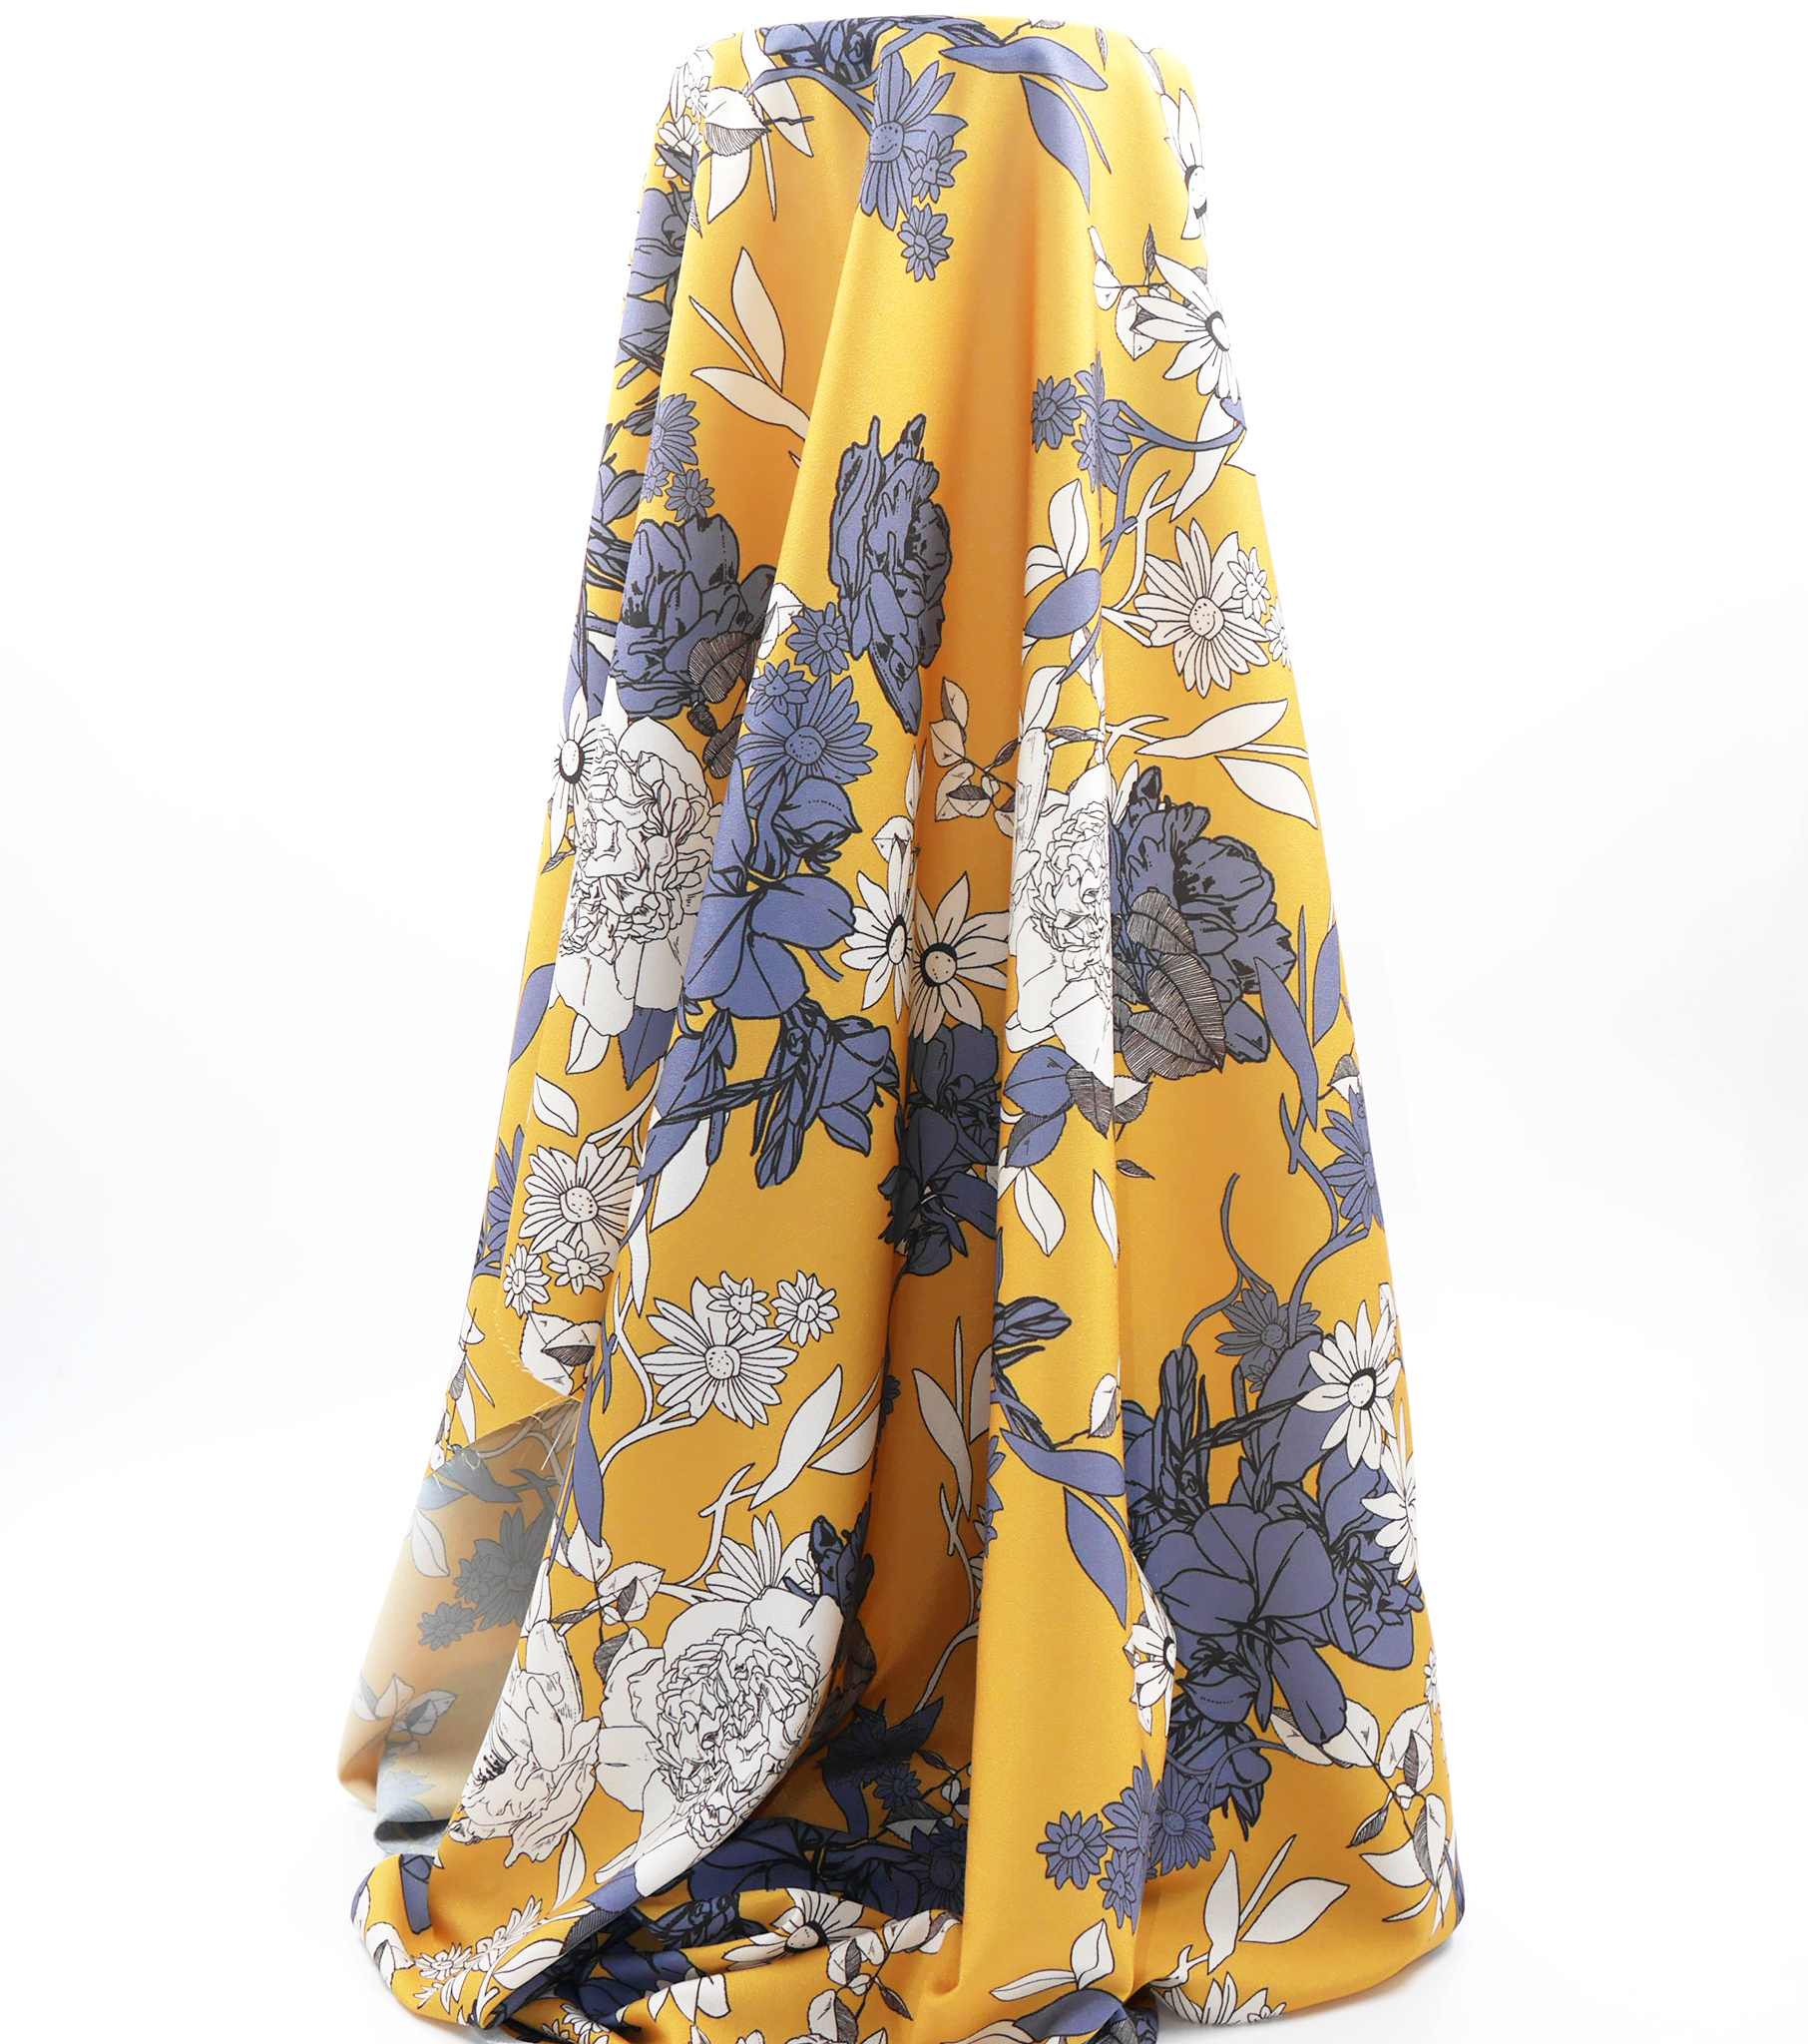 Printed Polyester $10.00p/m Golden Mustard Floral (Online Only)